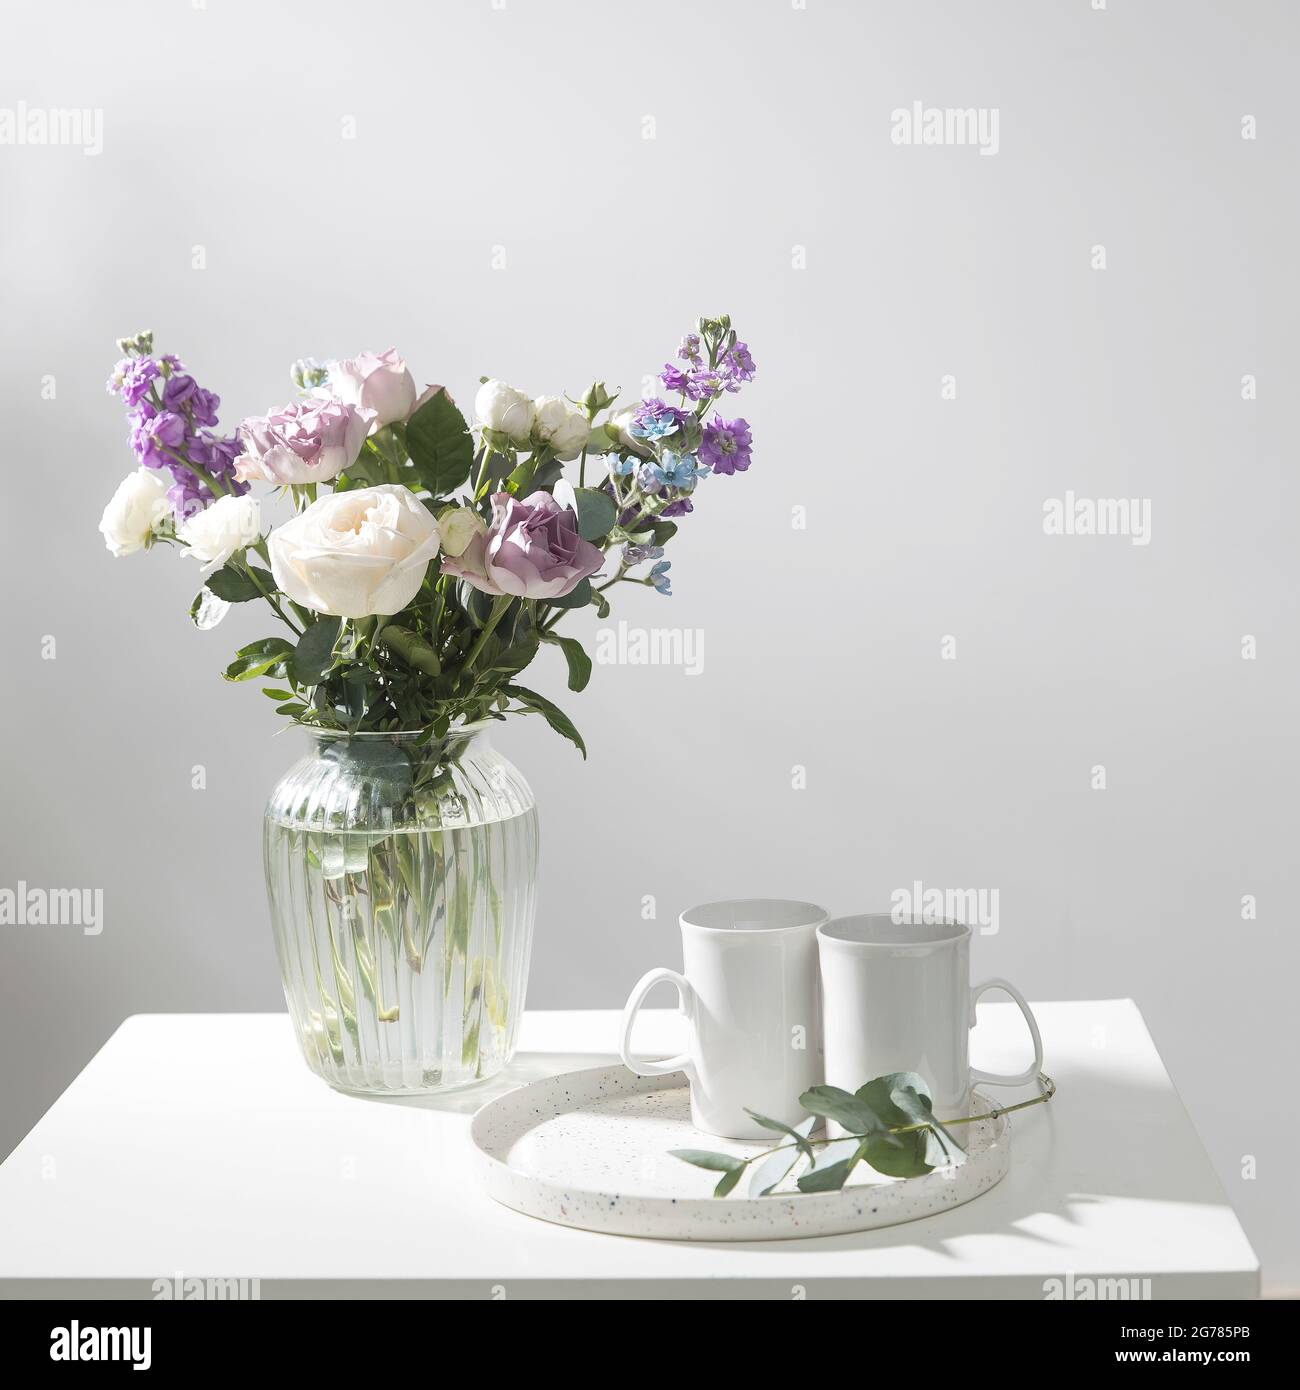 Bouquet of hackelia velutina, purple and white roses, small tea roses, matthiola incana and blue iris in glass vase is on the white coffee table with Stock Photo